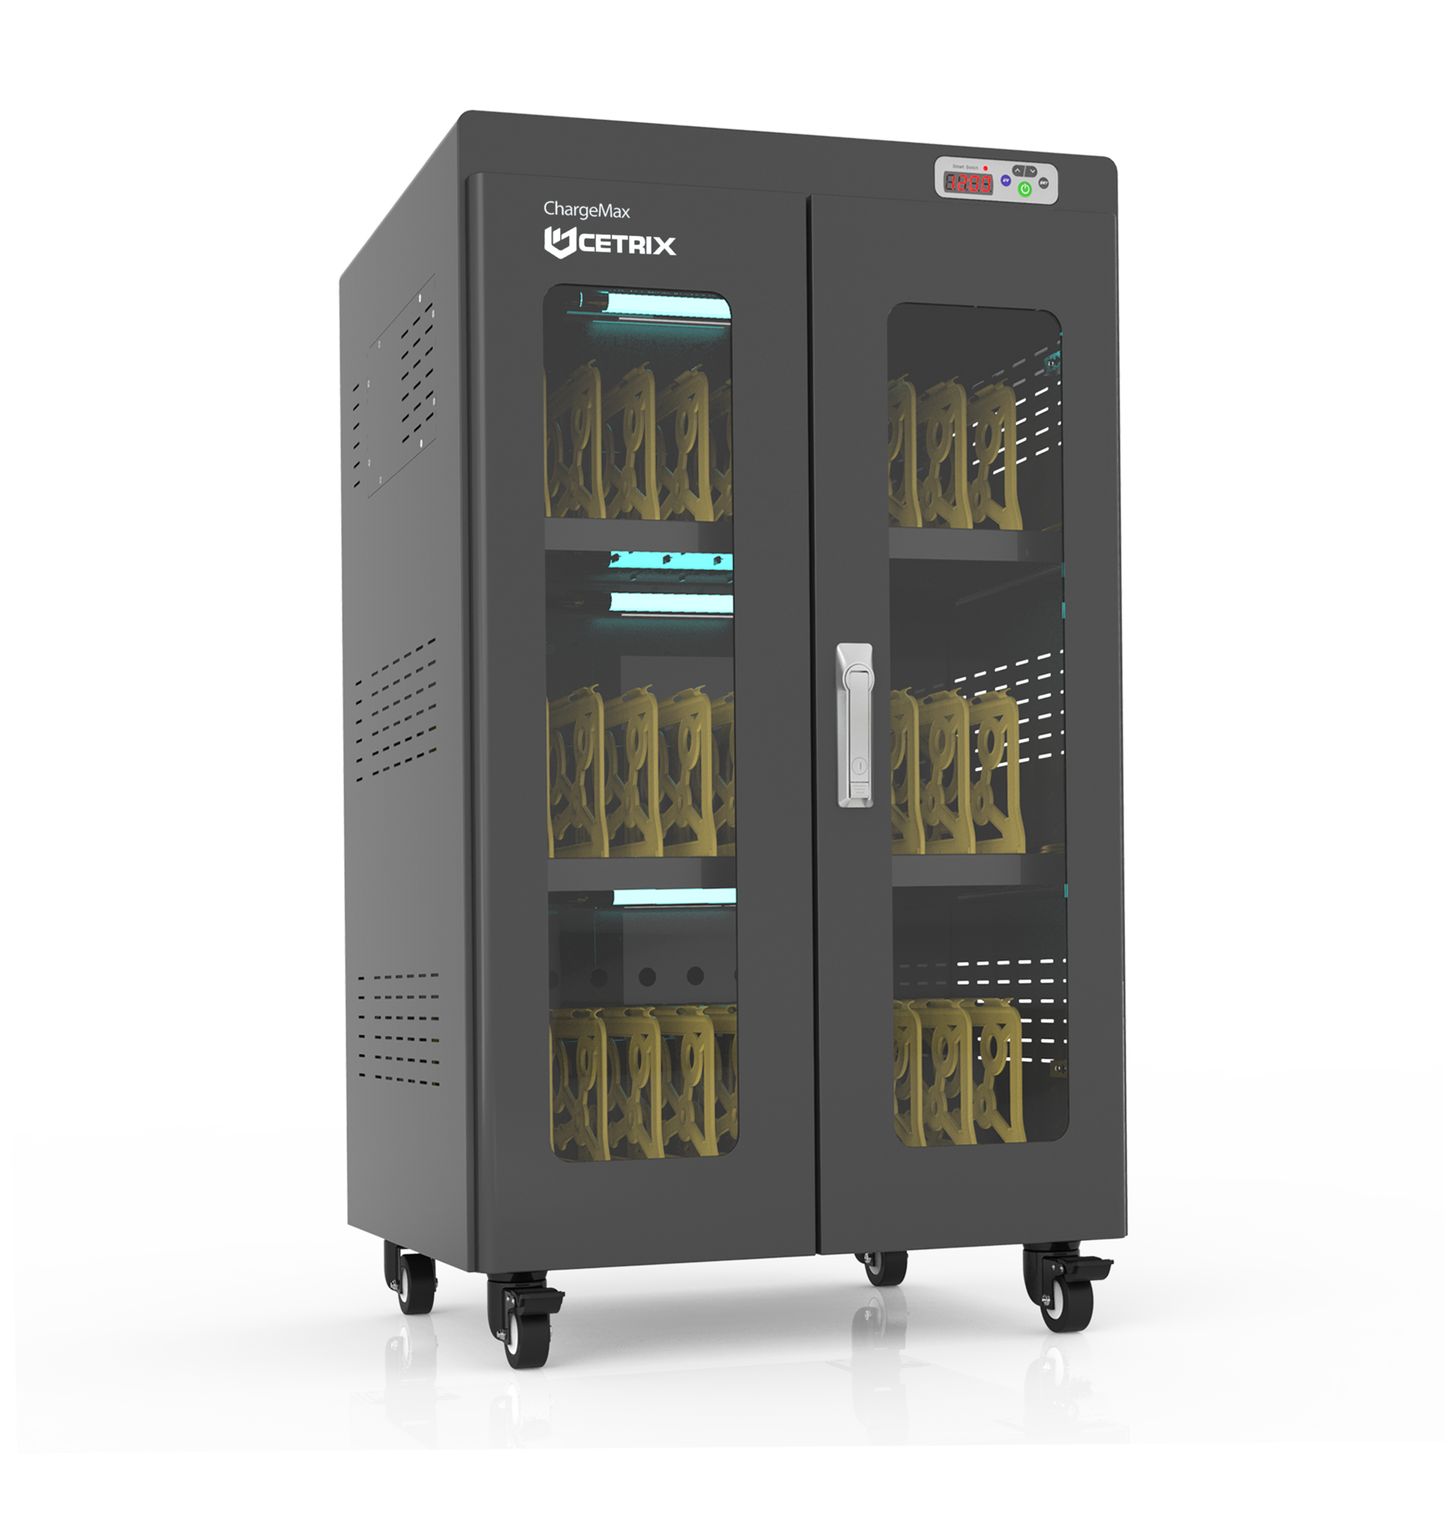 ChargeMax 40-bay Laptop Disinfection Charging Cabinet (CT-40BP) - Durable and Safe - USB charging ports are equipped with their own protection measures and an LED charging indicator